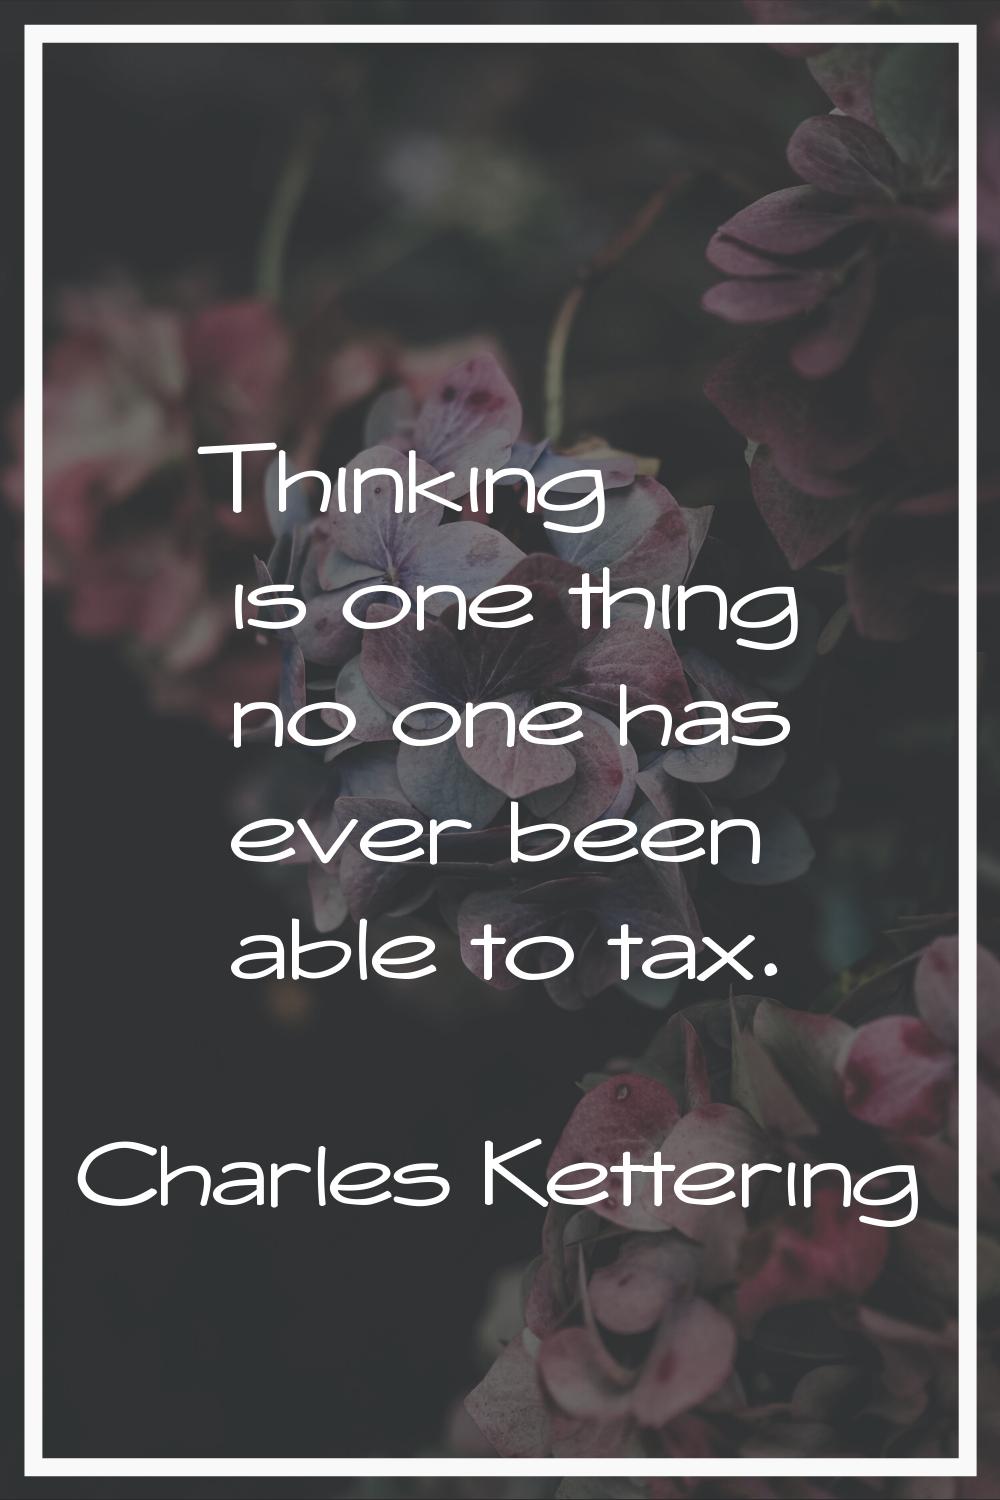 Thinking is one thing no one has ever been able to tax.